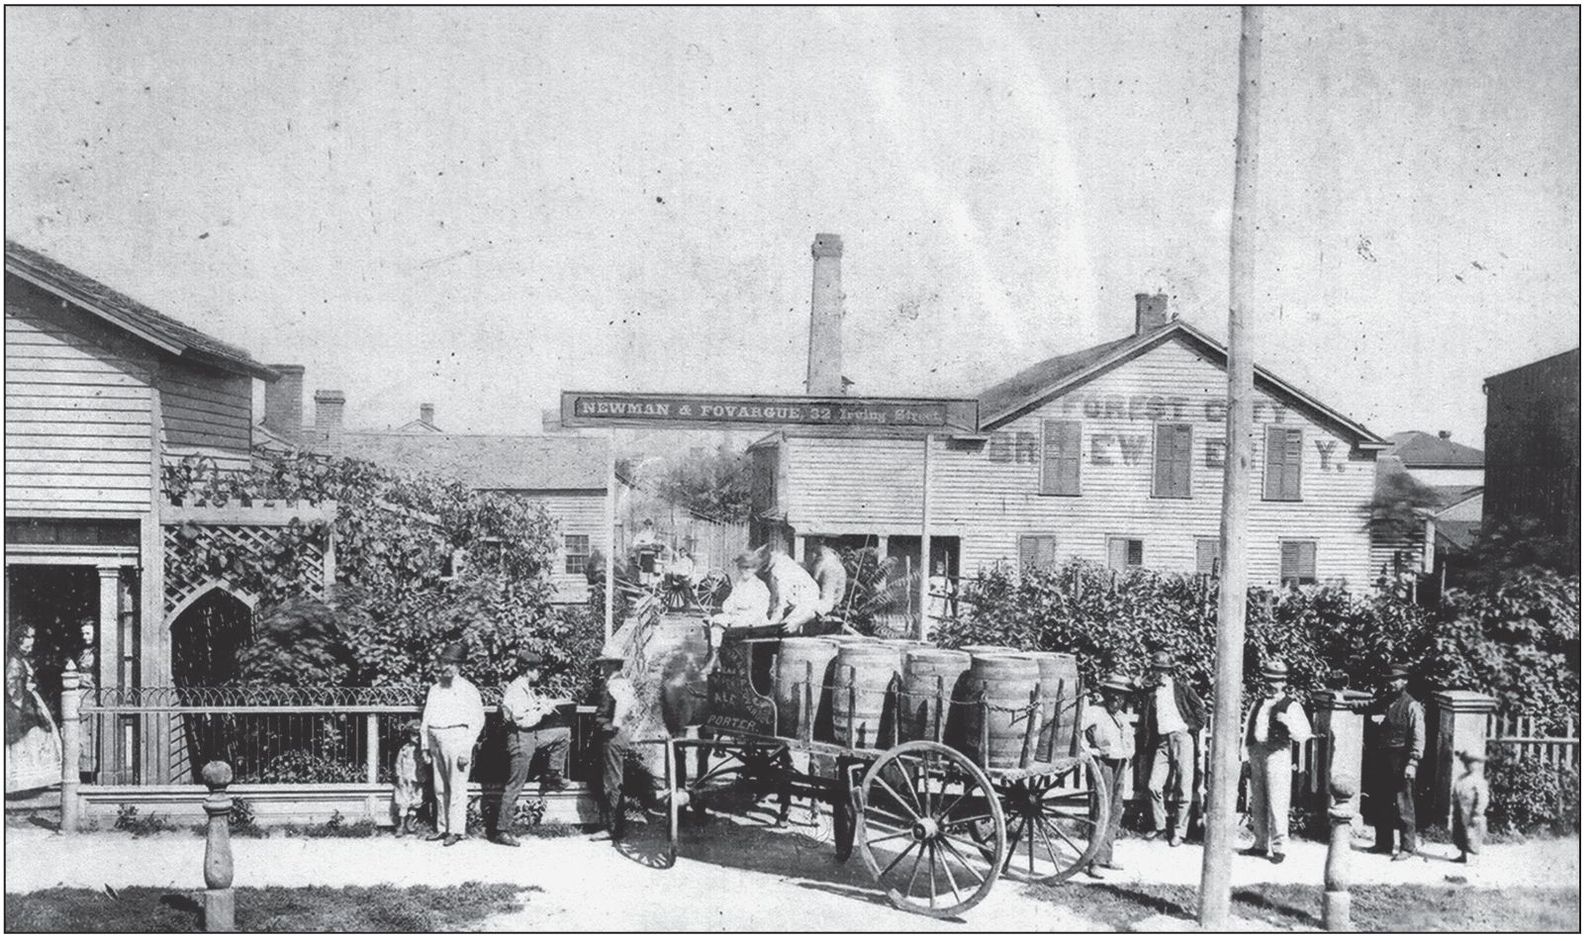 The oldest known photograph of a Cleveland brewery this view from around 1870 - photo 10